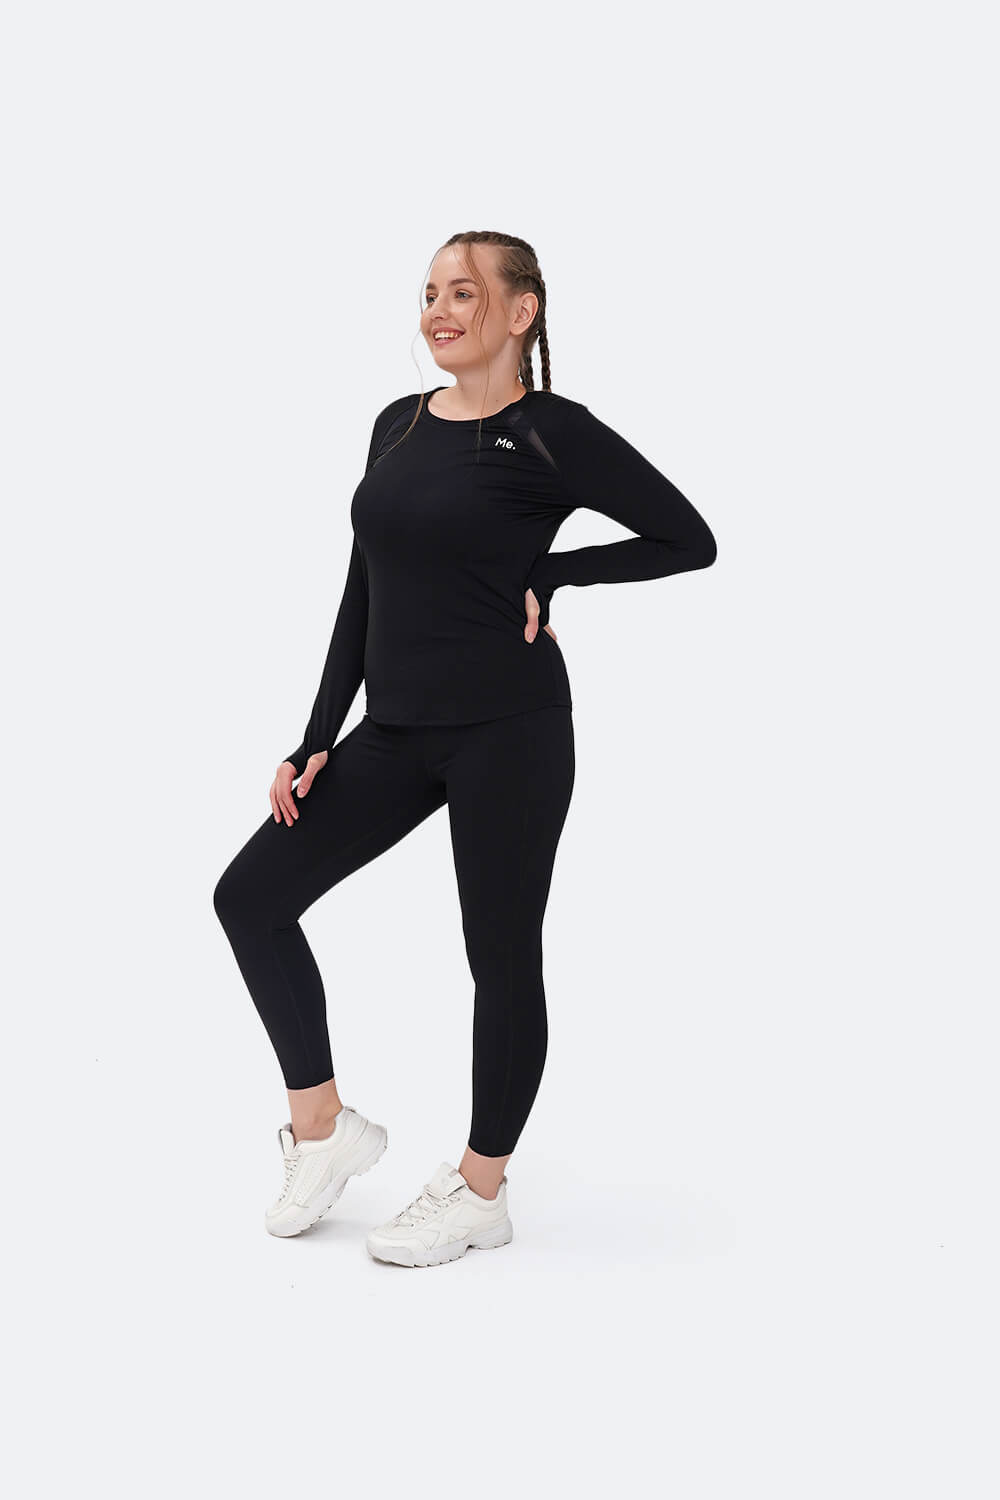 BetterMe High Waisted Slimming Leggings and Long Sleeve Top with  Full-Coverage Set in Black | 2 Pieces Women's Classic Workout and Chill Set